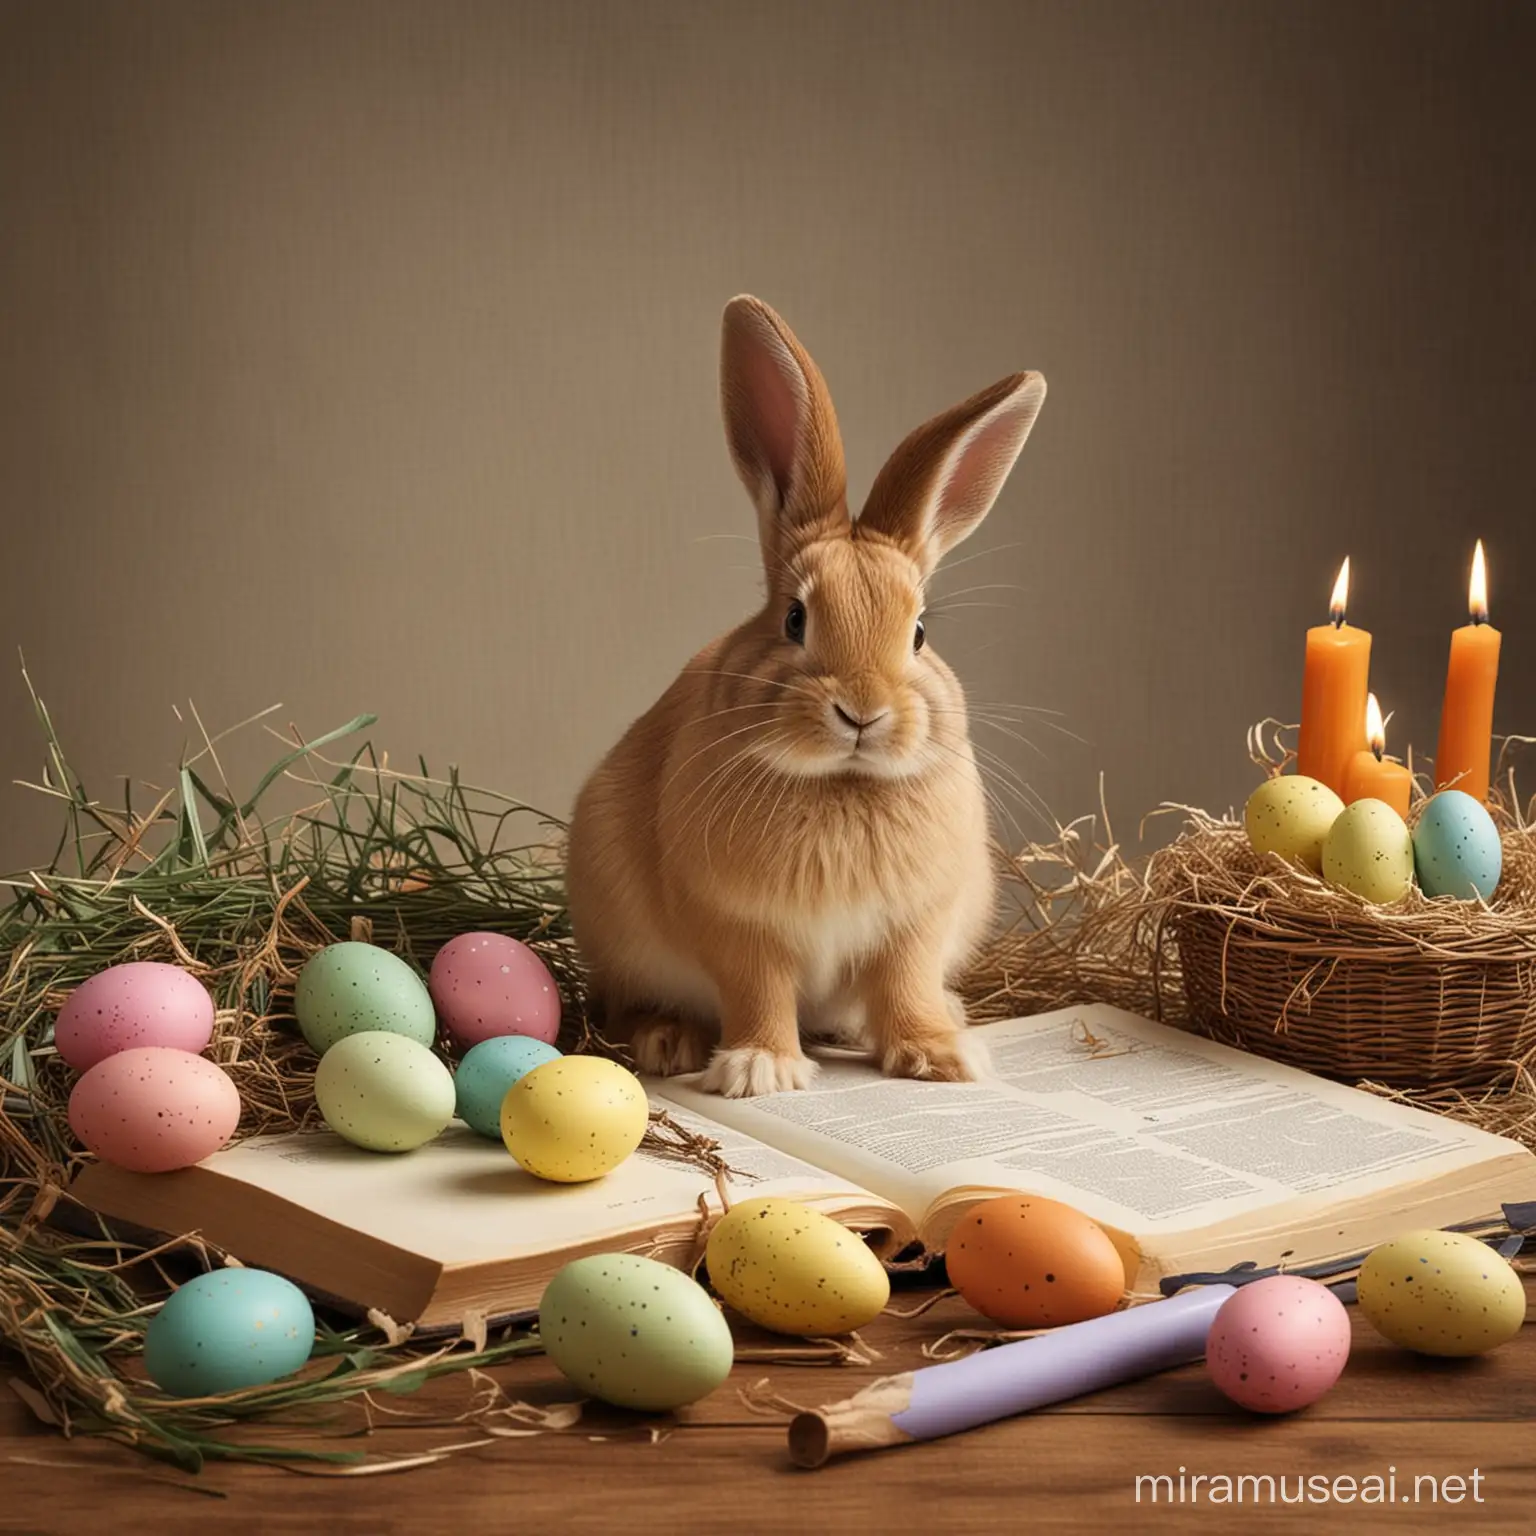 Create an image that reflects the celebration of Easter and the pursuit of studies and education. 
This should be aimed at students from university.